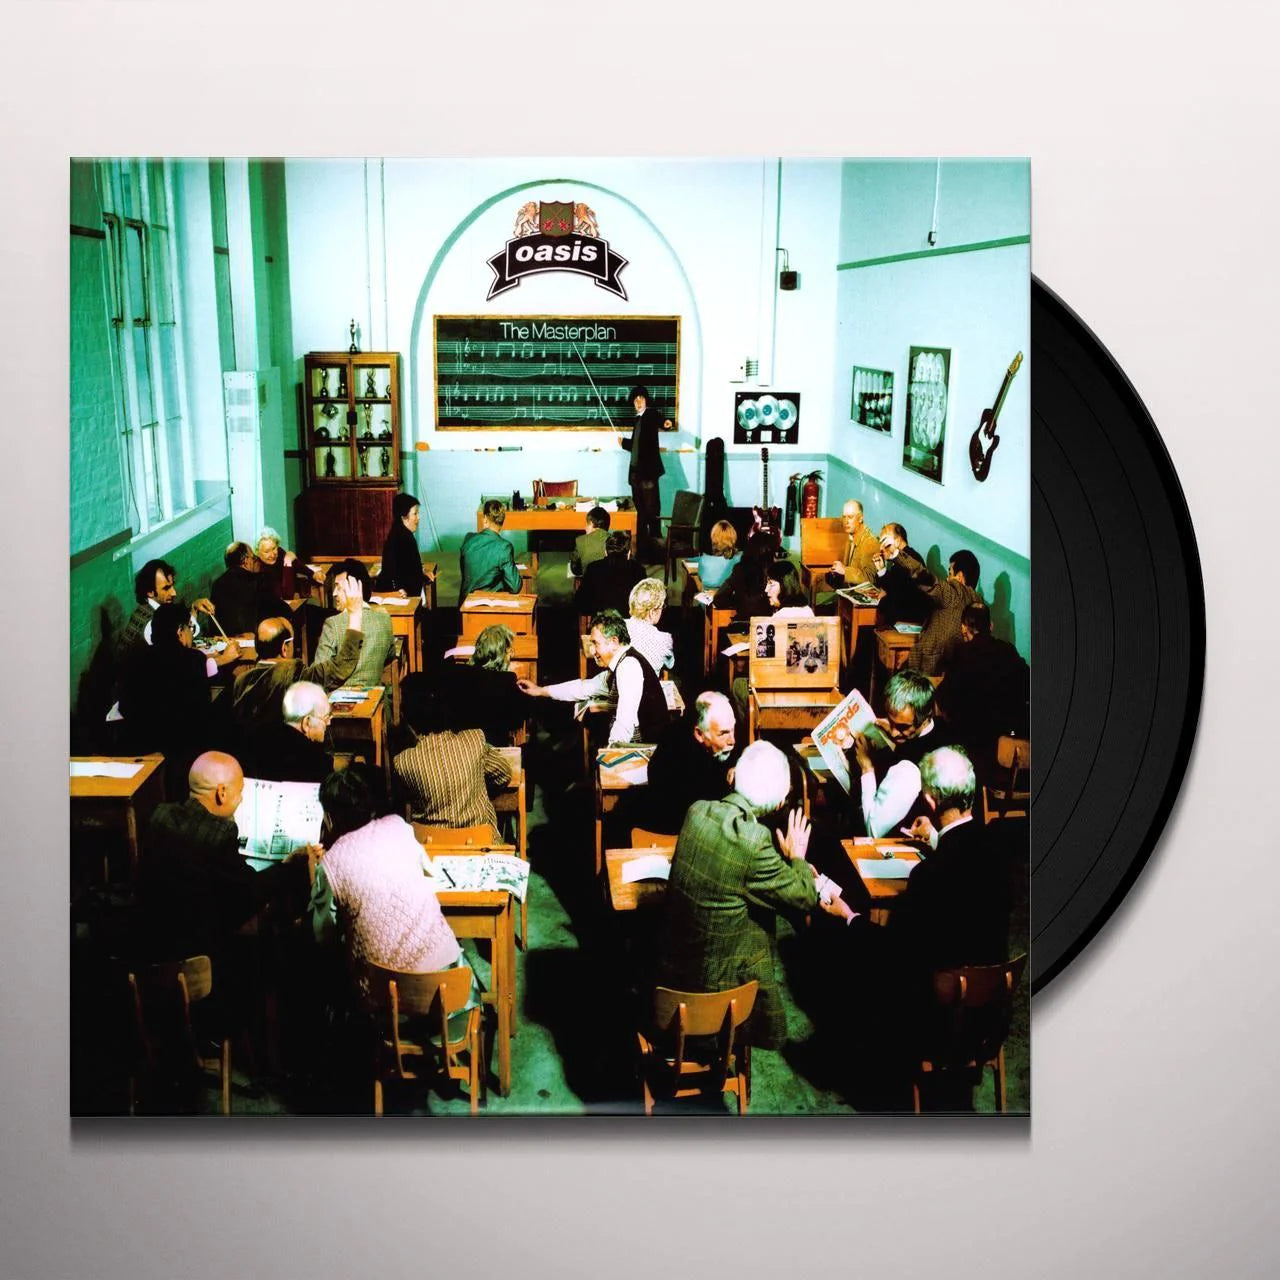 OASIS The Masterplan (Reissue) (Vinyl 2LP) – Flying Out